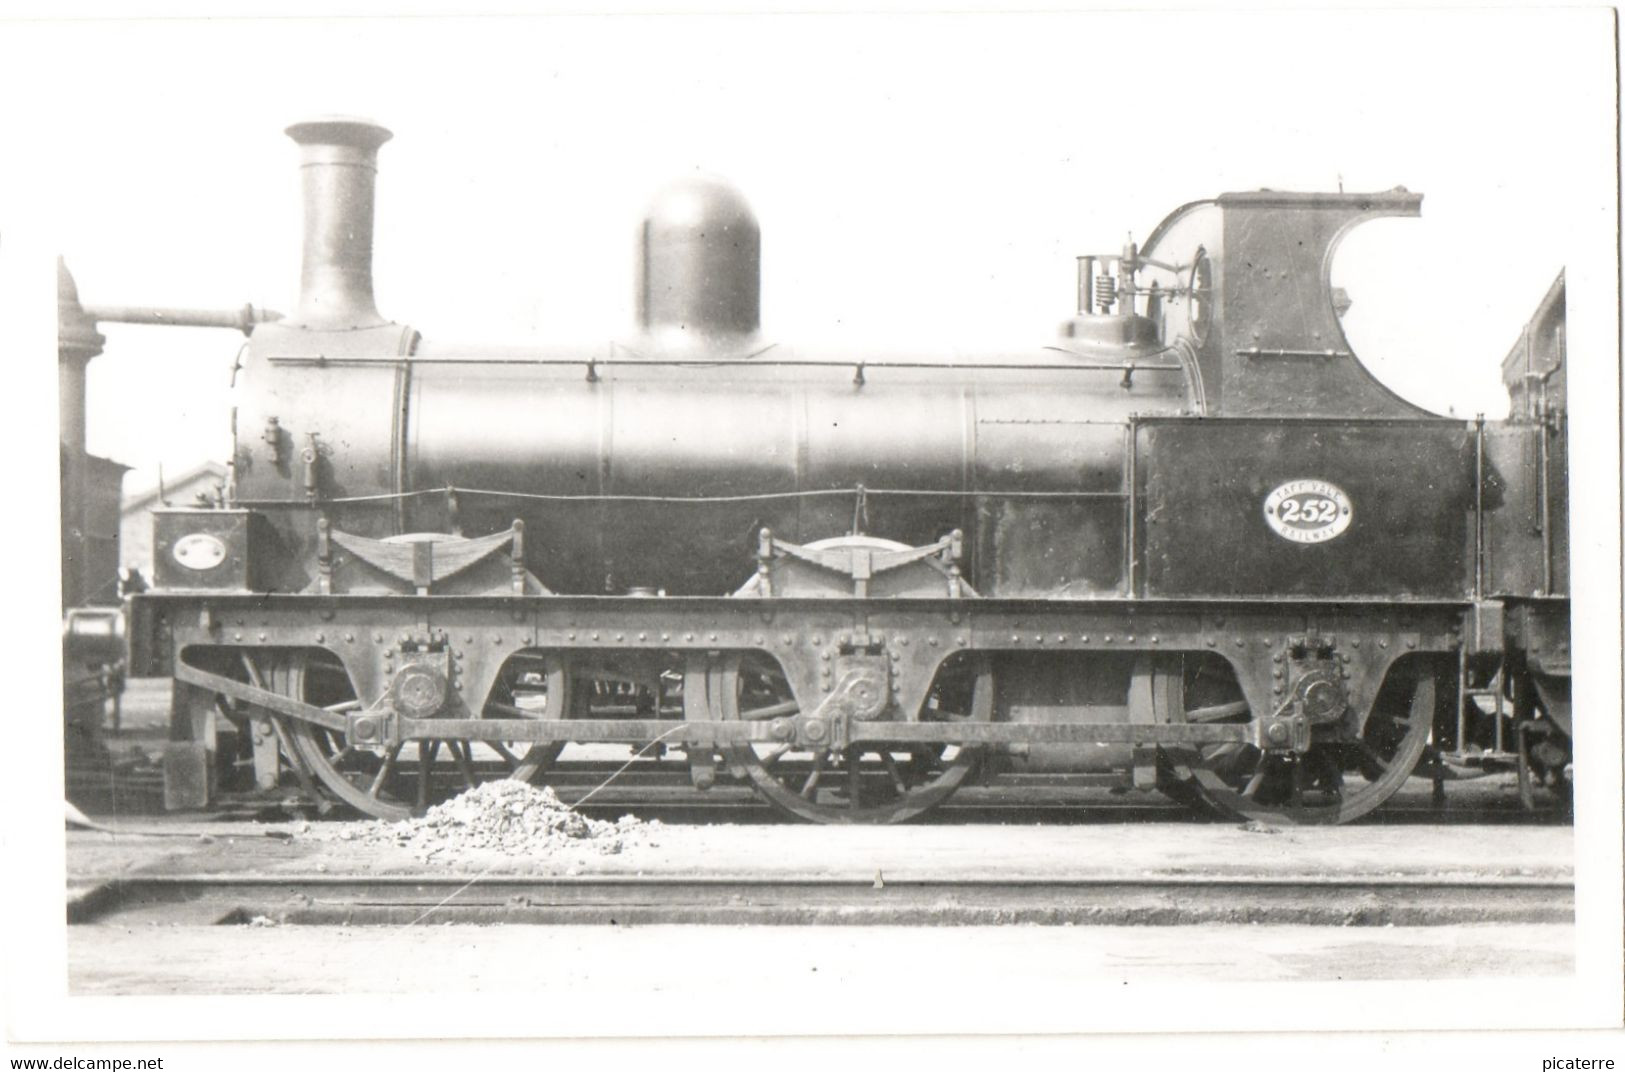 Postcard Size Photograph Of Taff Vale Railway- Engine No.252 (dates Back To 1860) - Trains